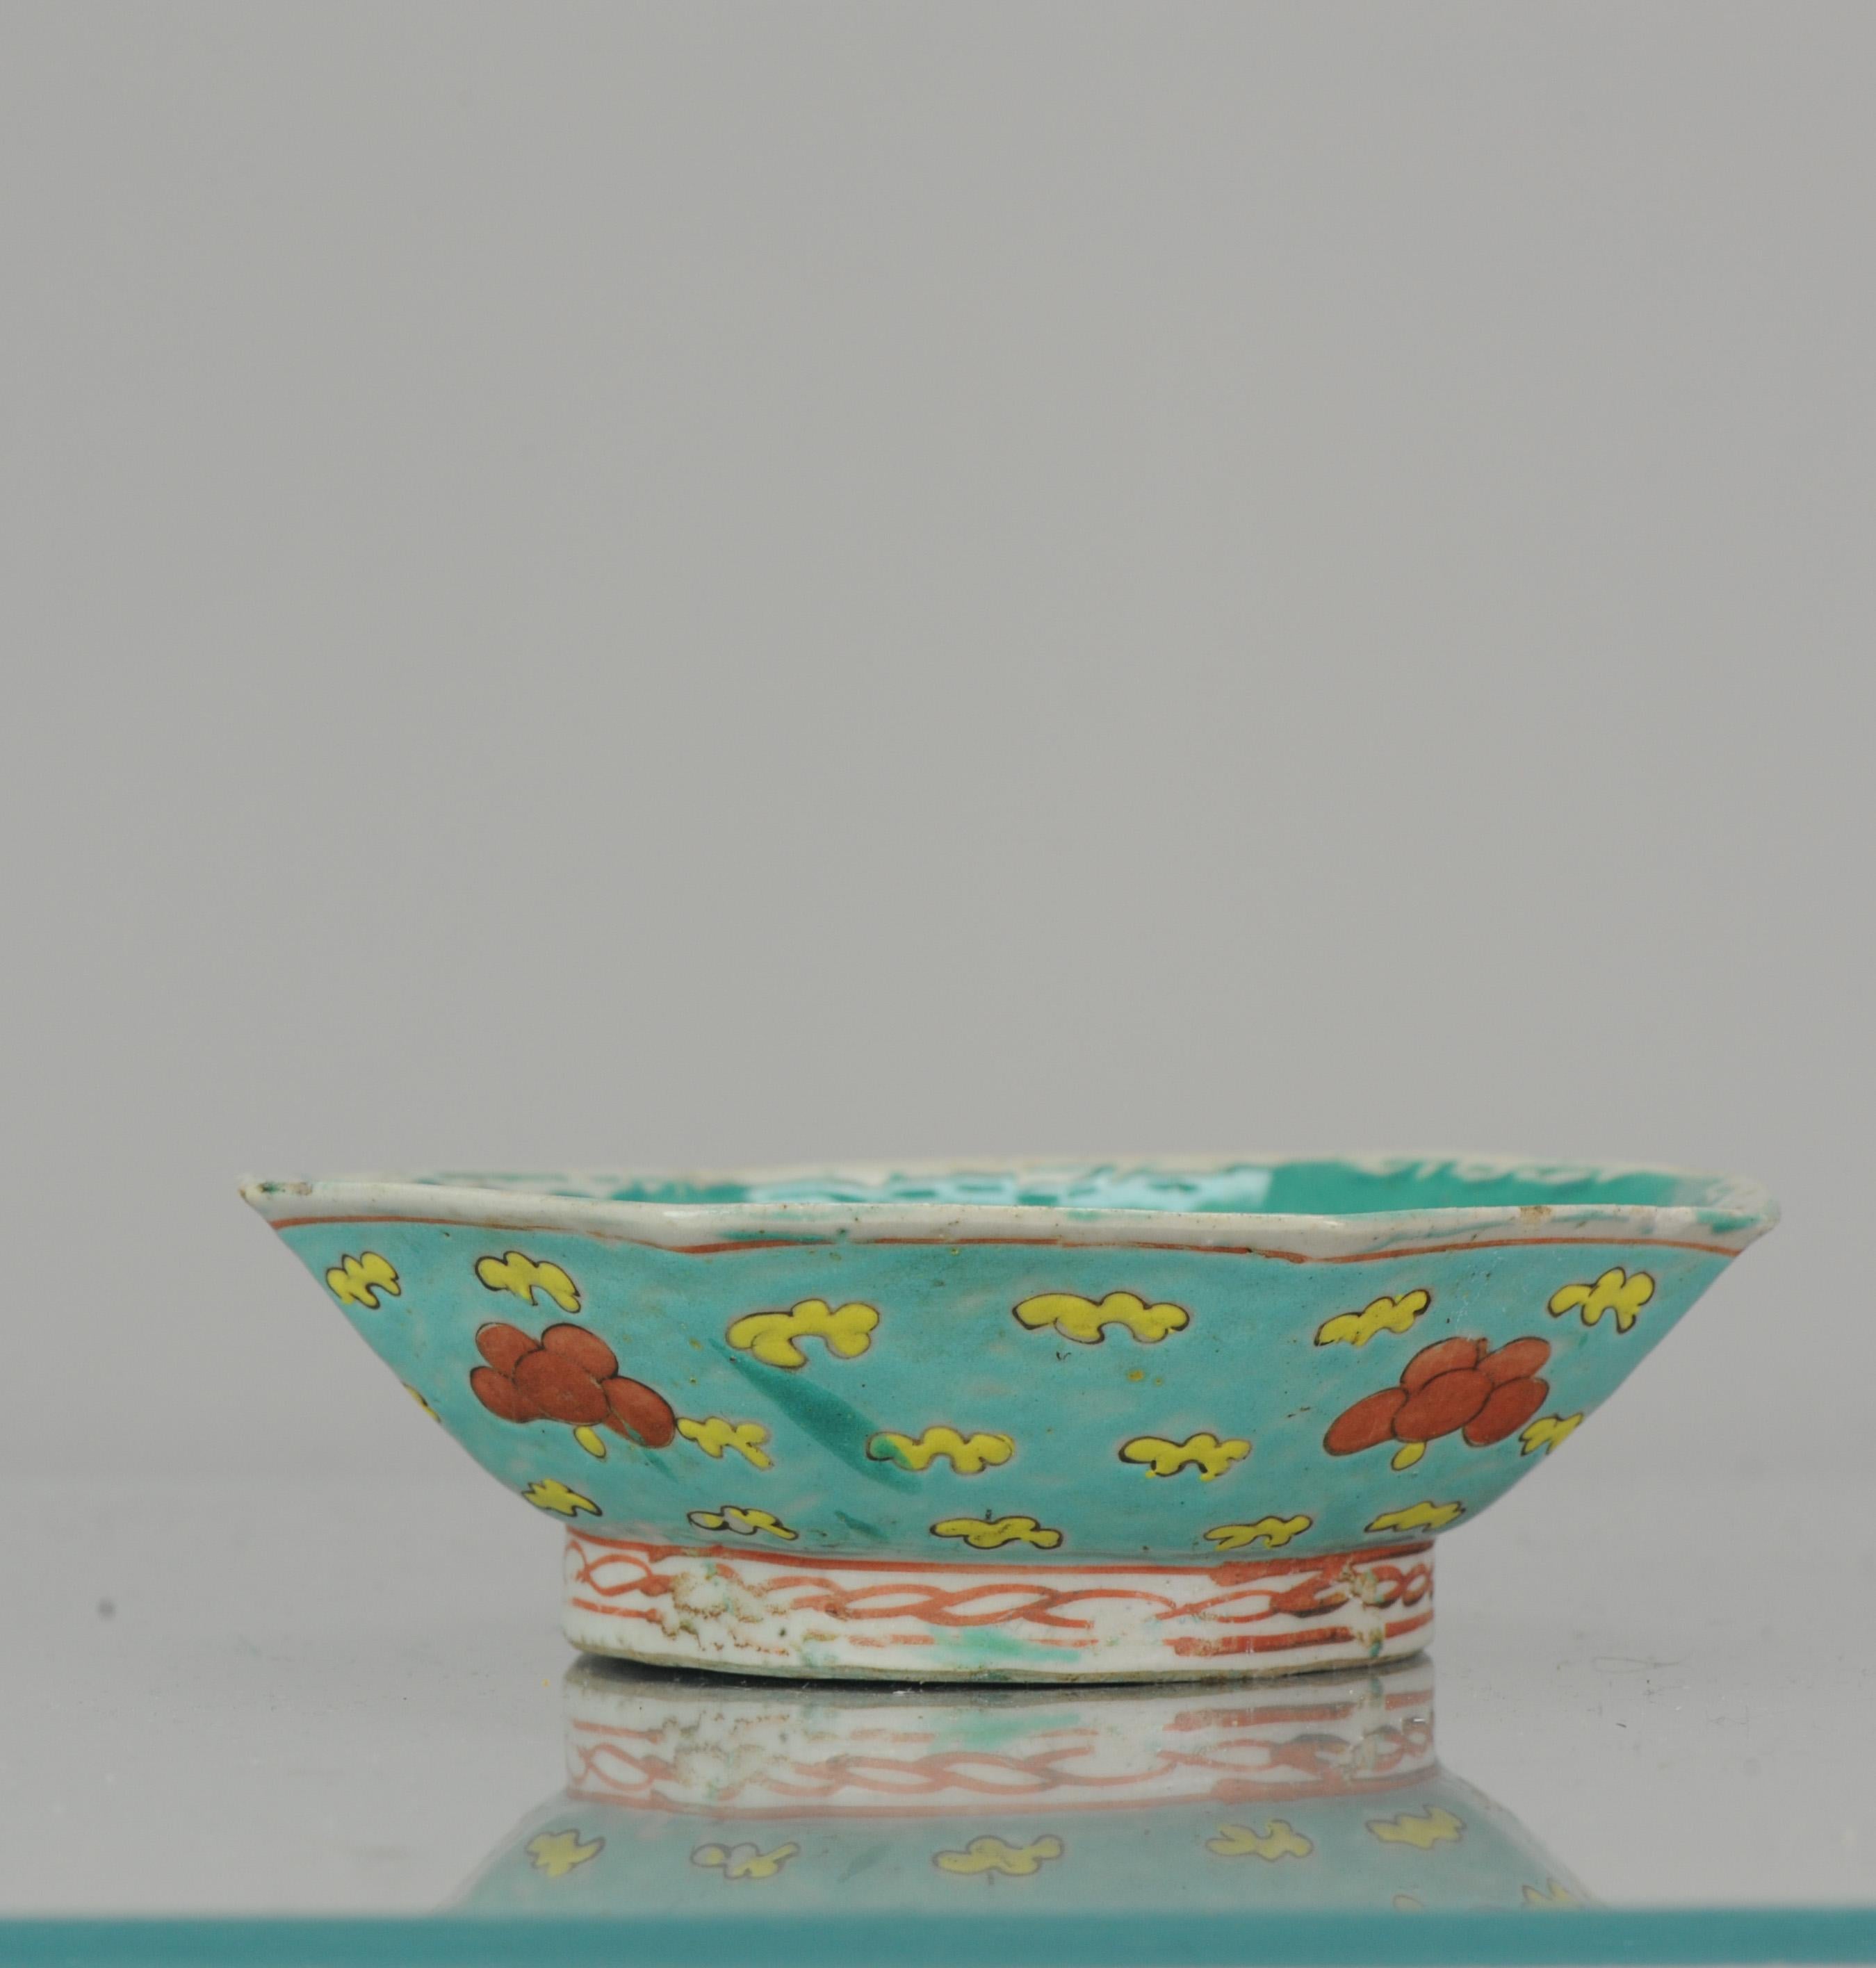 A very nice footed bowl with turqoise enamels and outside painted with ruyi and flowers. Nice display item.

Additional information:
Material: Porcelain & Pottery
Type: Bowls
Region of Origin: Japan
Age: Pre-1800
Period: 19th century, 20th